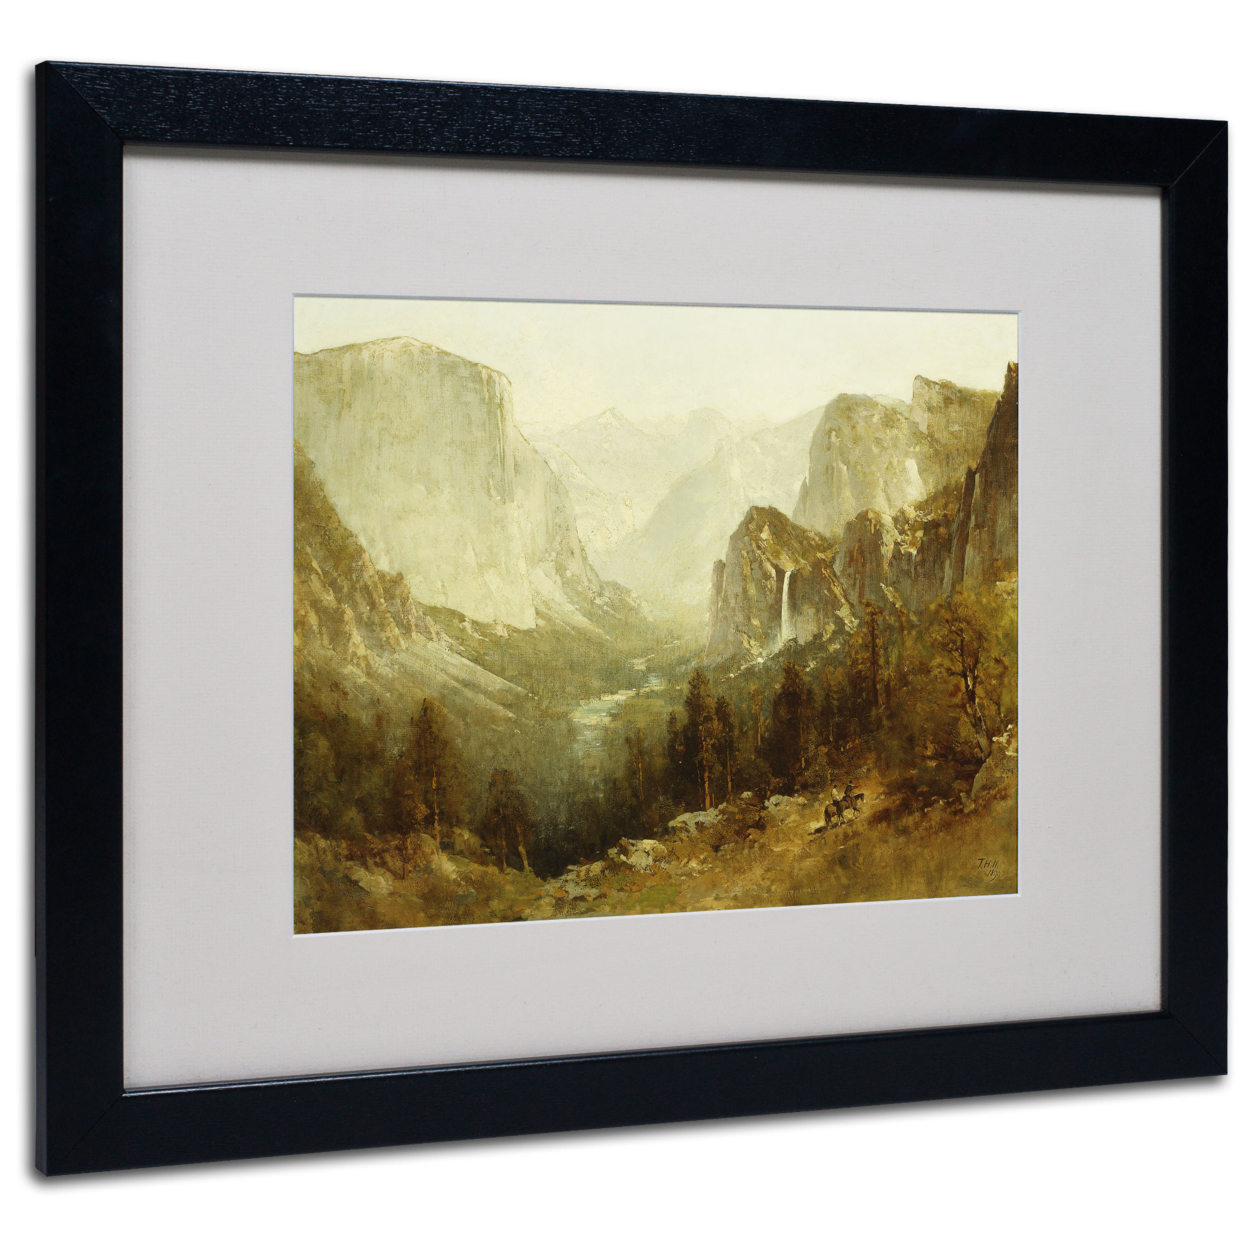 Thomas Hill 'Hunting In Yosemite 1890' Black Wooden Framed Art 18 X 22 Inches